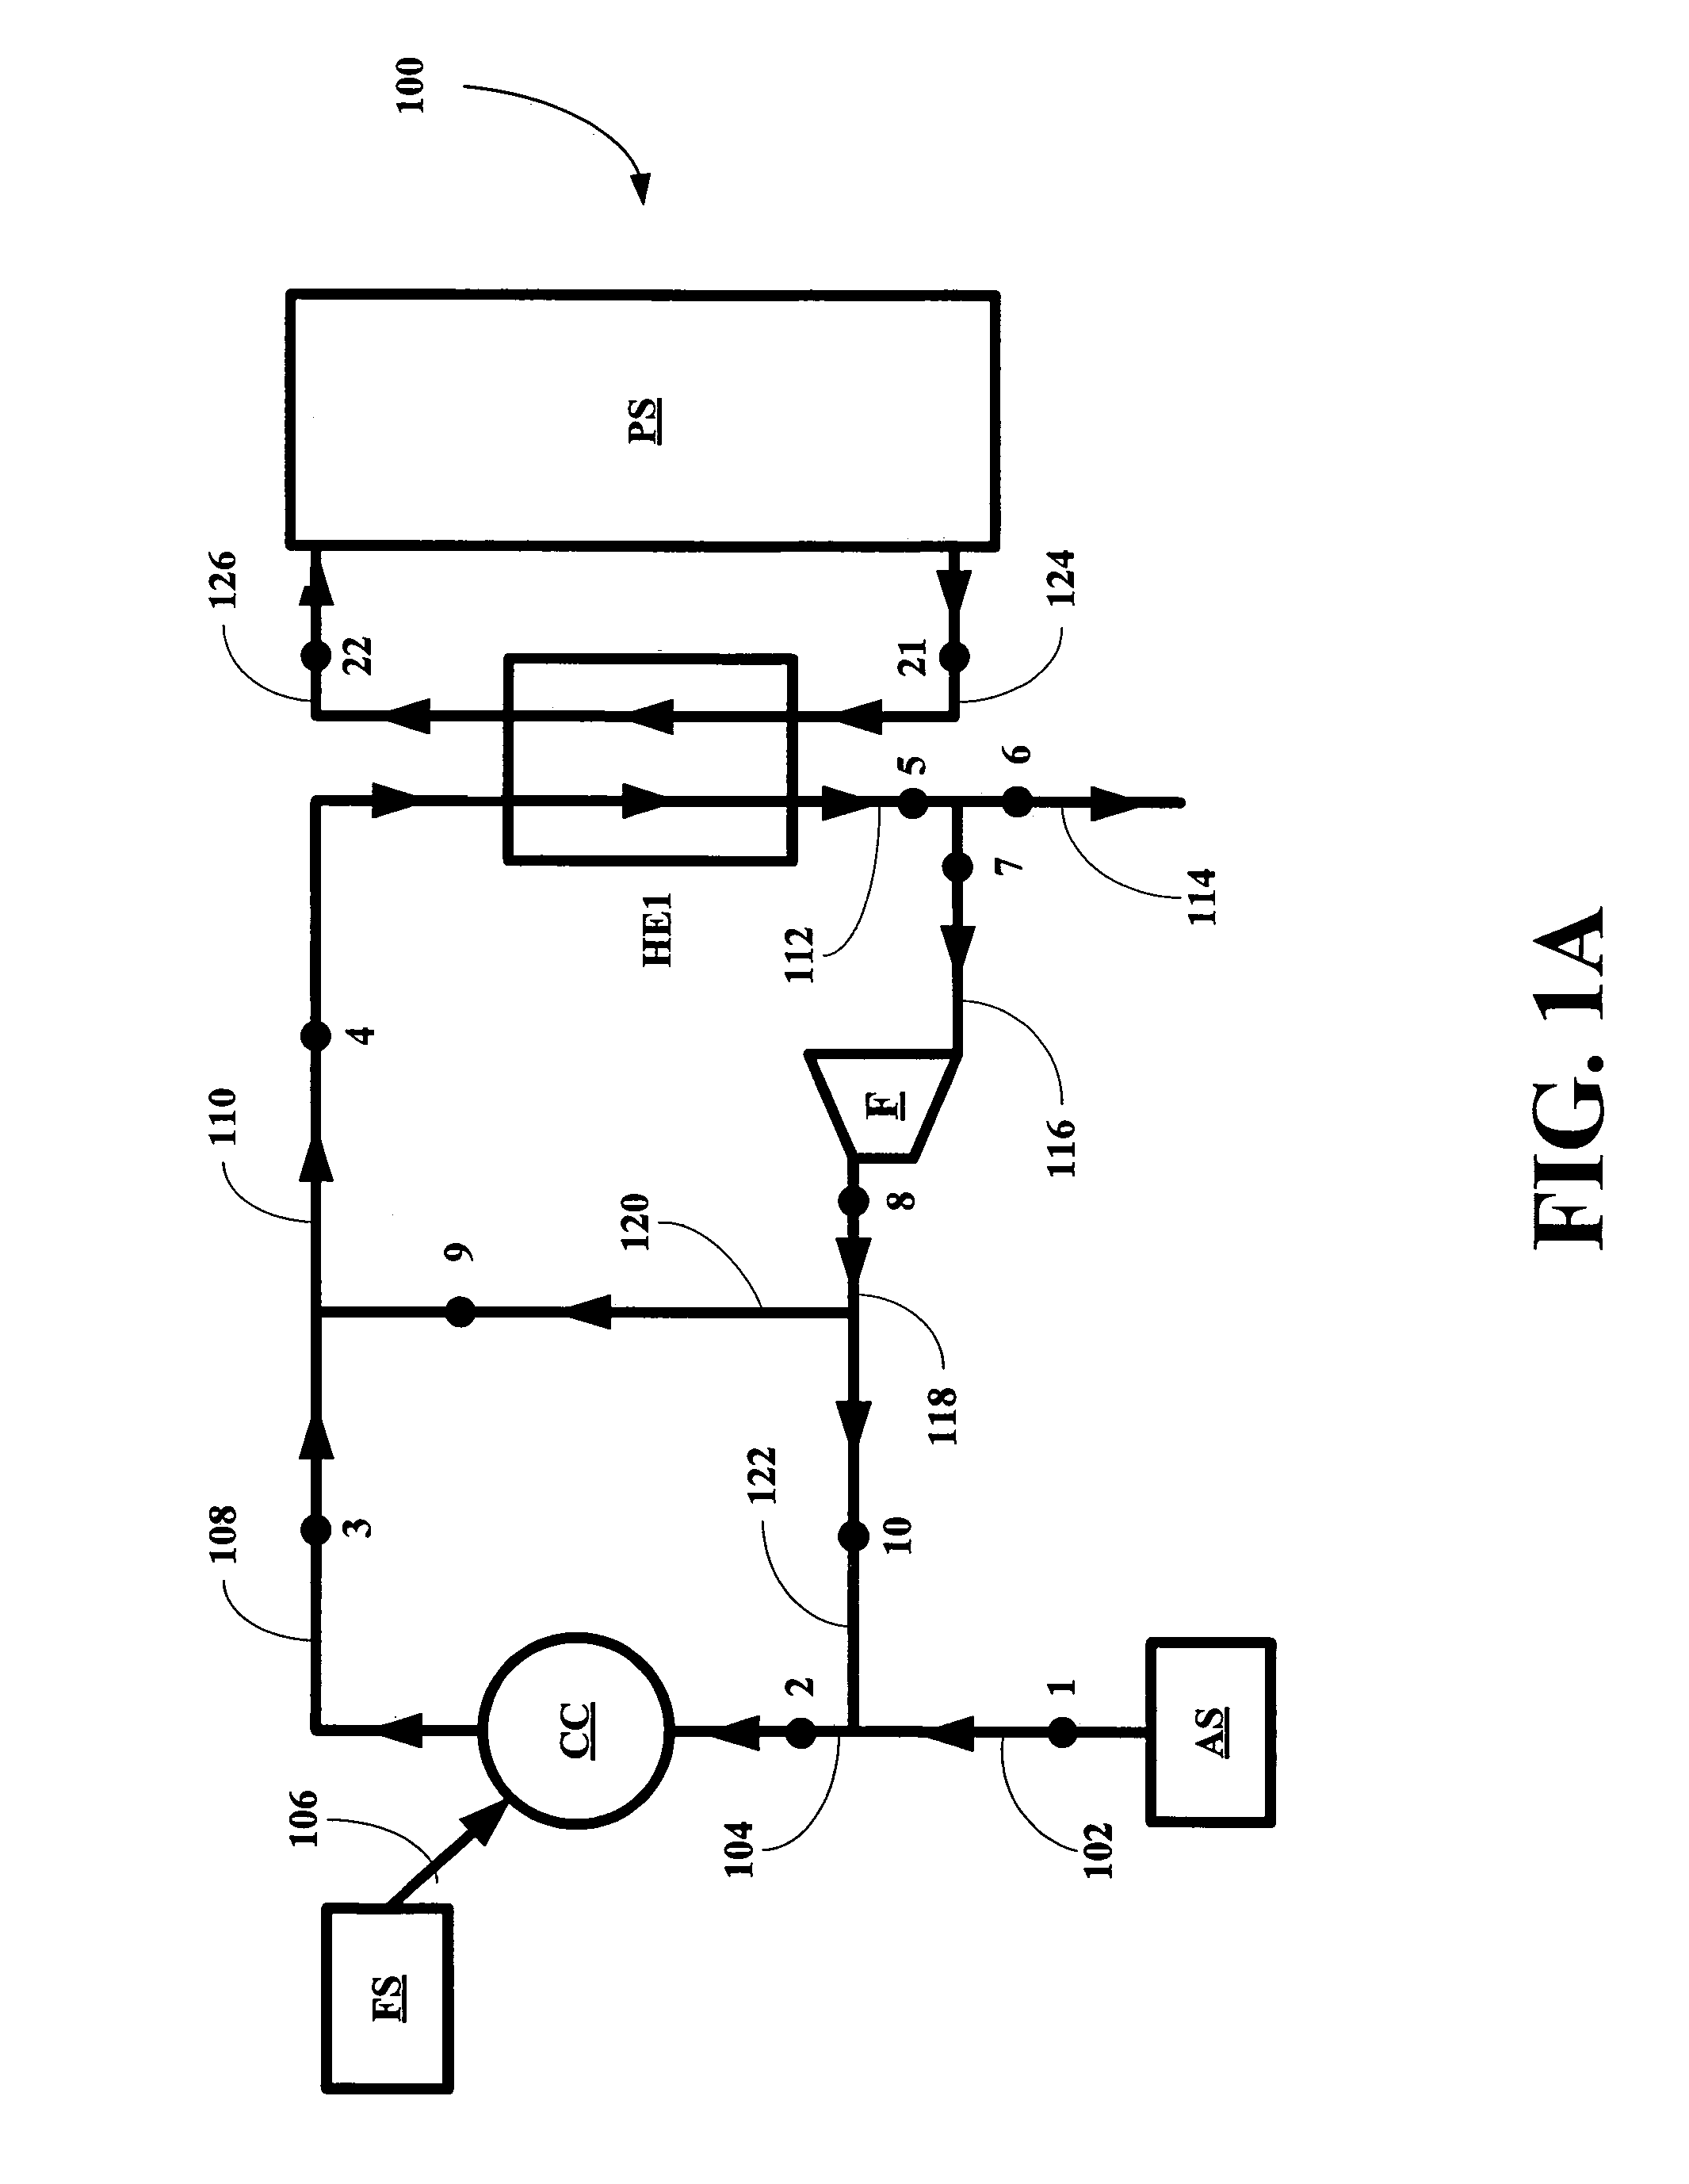 Combustion system with recirculation of flue gas